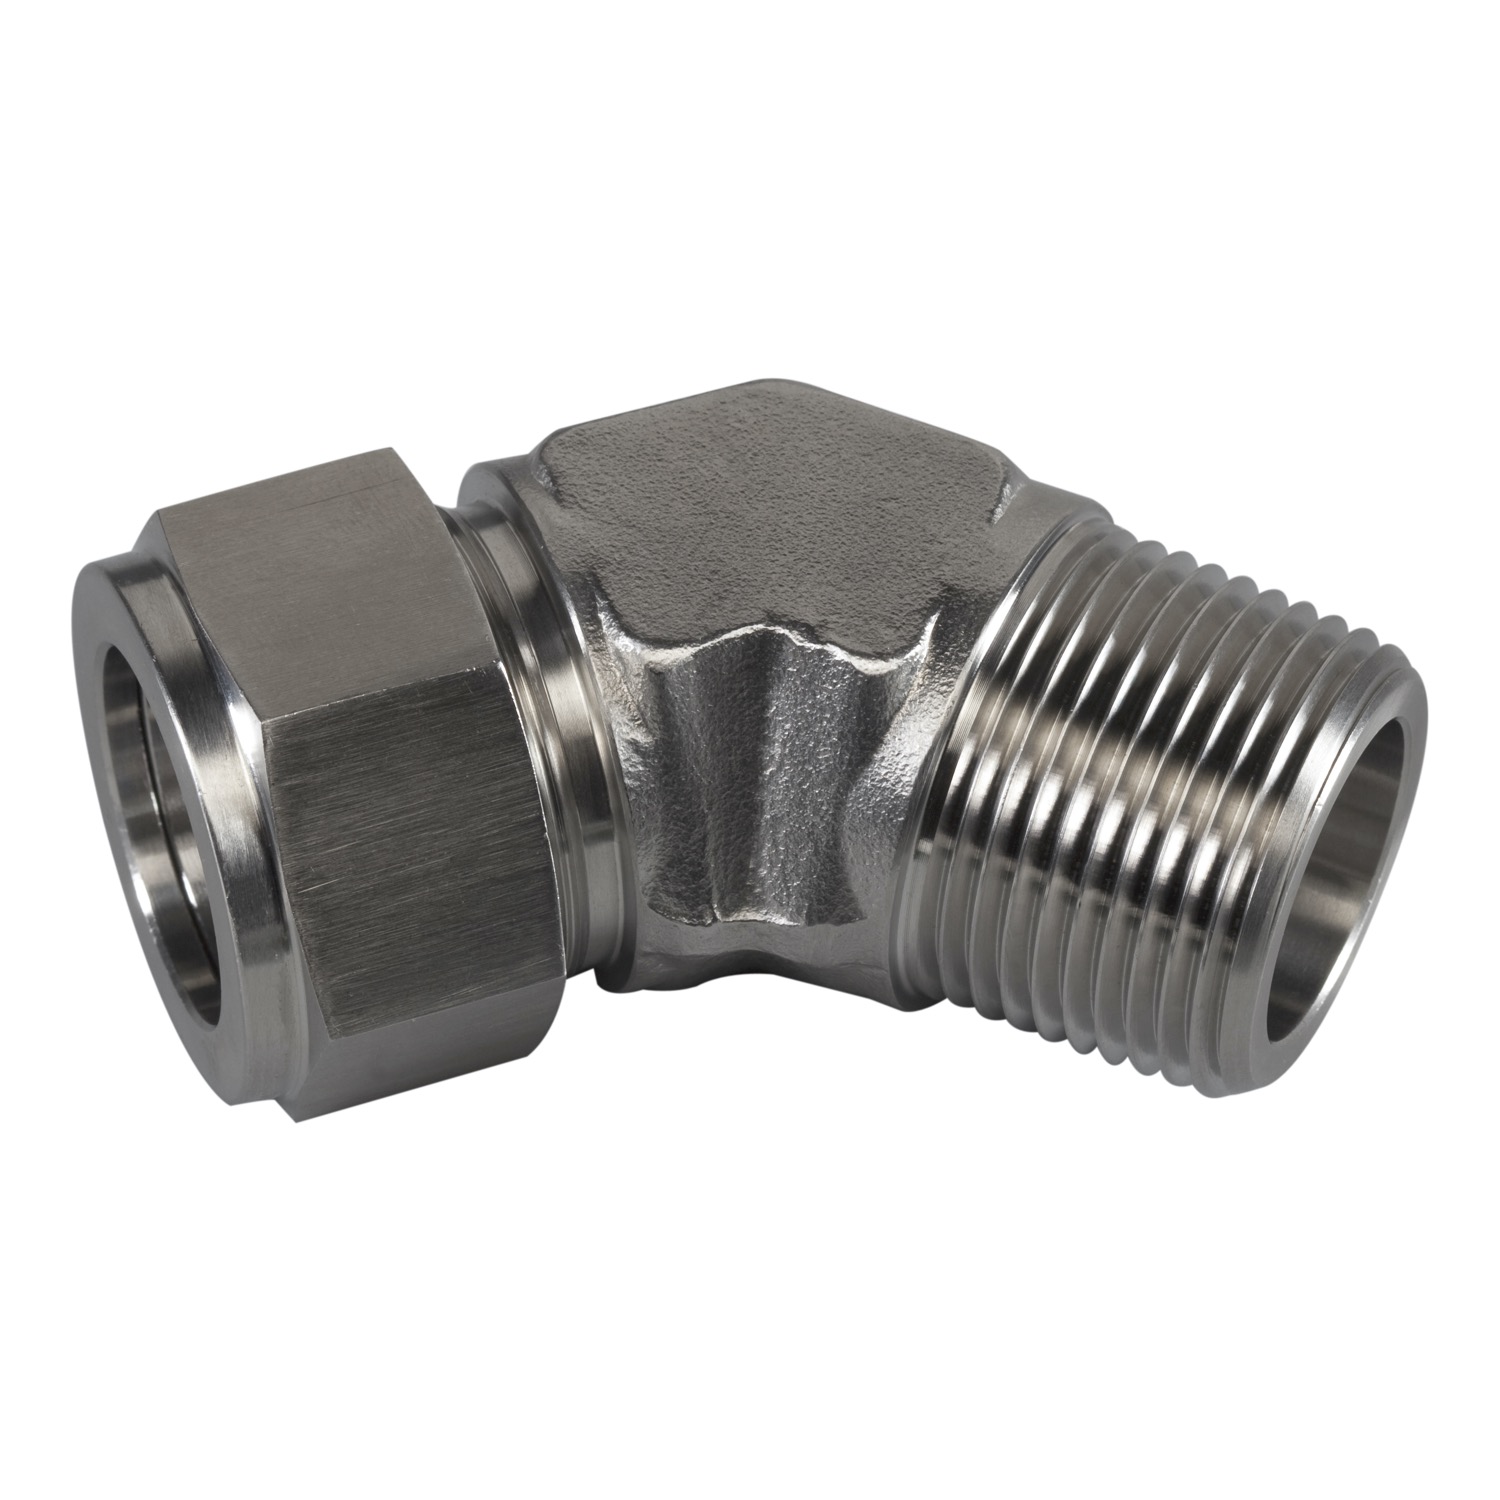 45° Elbows - Compression Fittings, Male NPT, N2503 Series